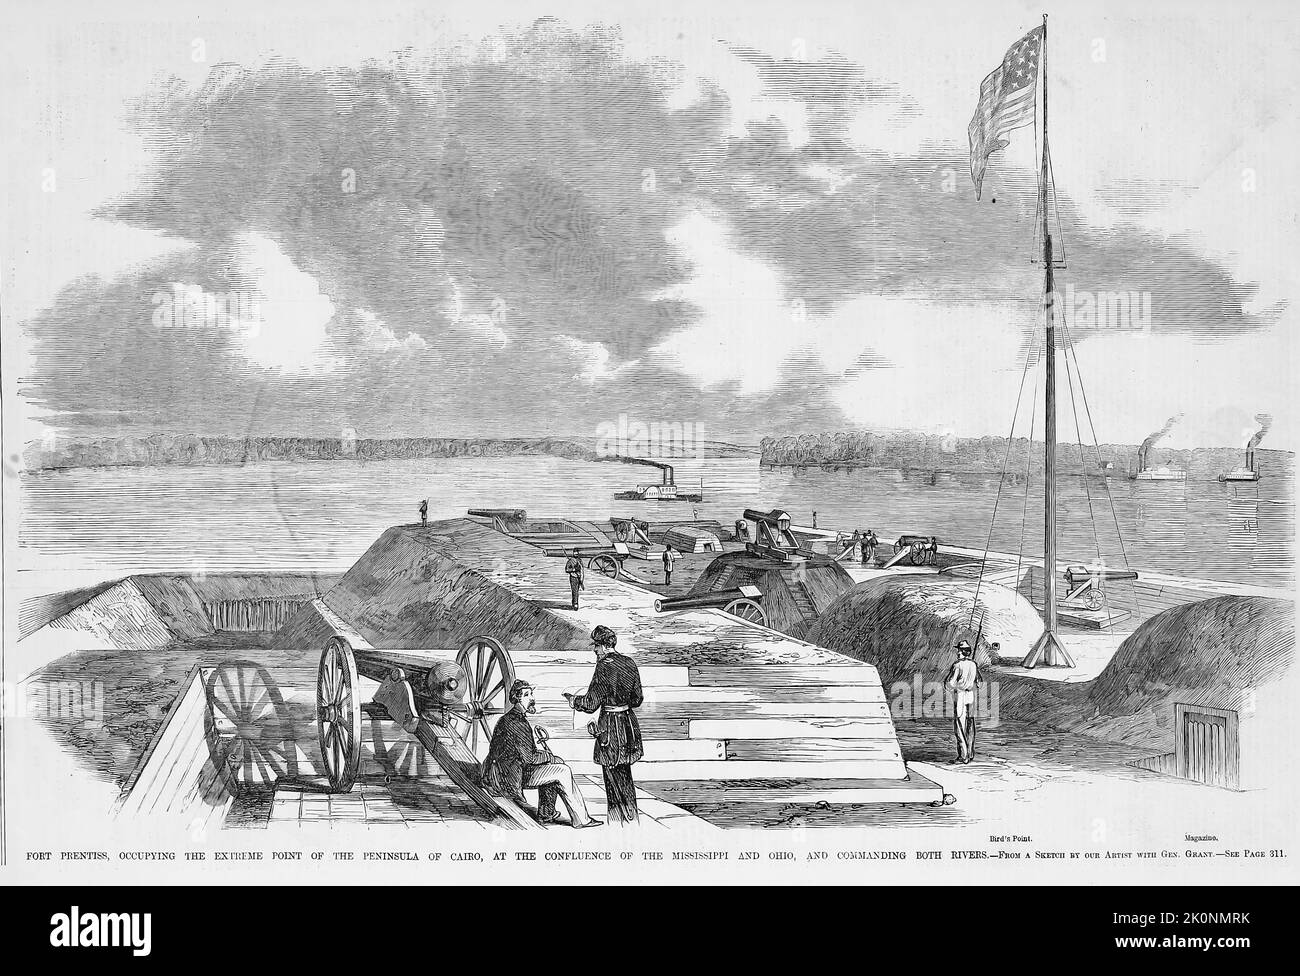 Fort Prentiss, occupying the extreme point of the peninsula of Cairo, Illinois, at the confluence of the Mississippi and Ohio Rivers, and commanding both rivers. September 1861. 19th century American Civil War illustration from Frank Leslie's Illustrated Newspaper Stock Photo